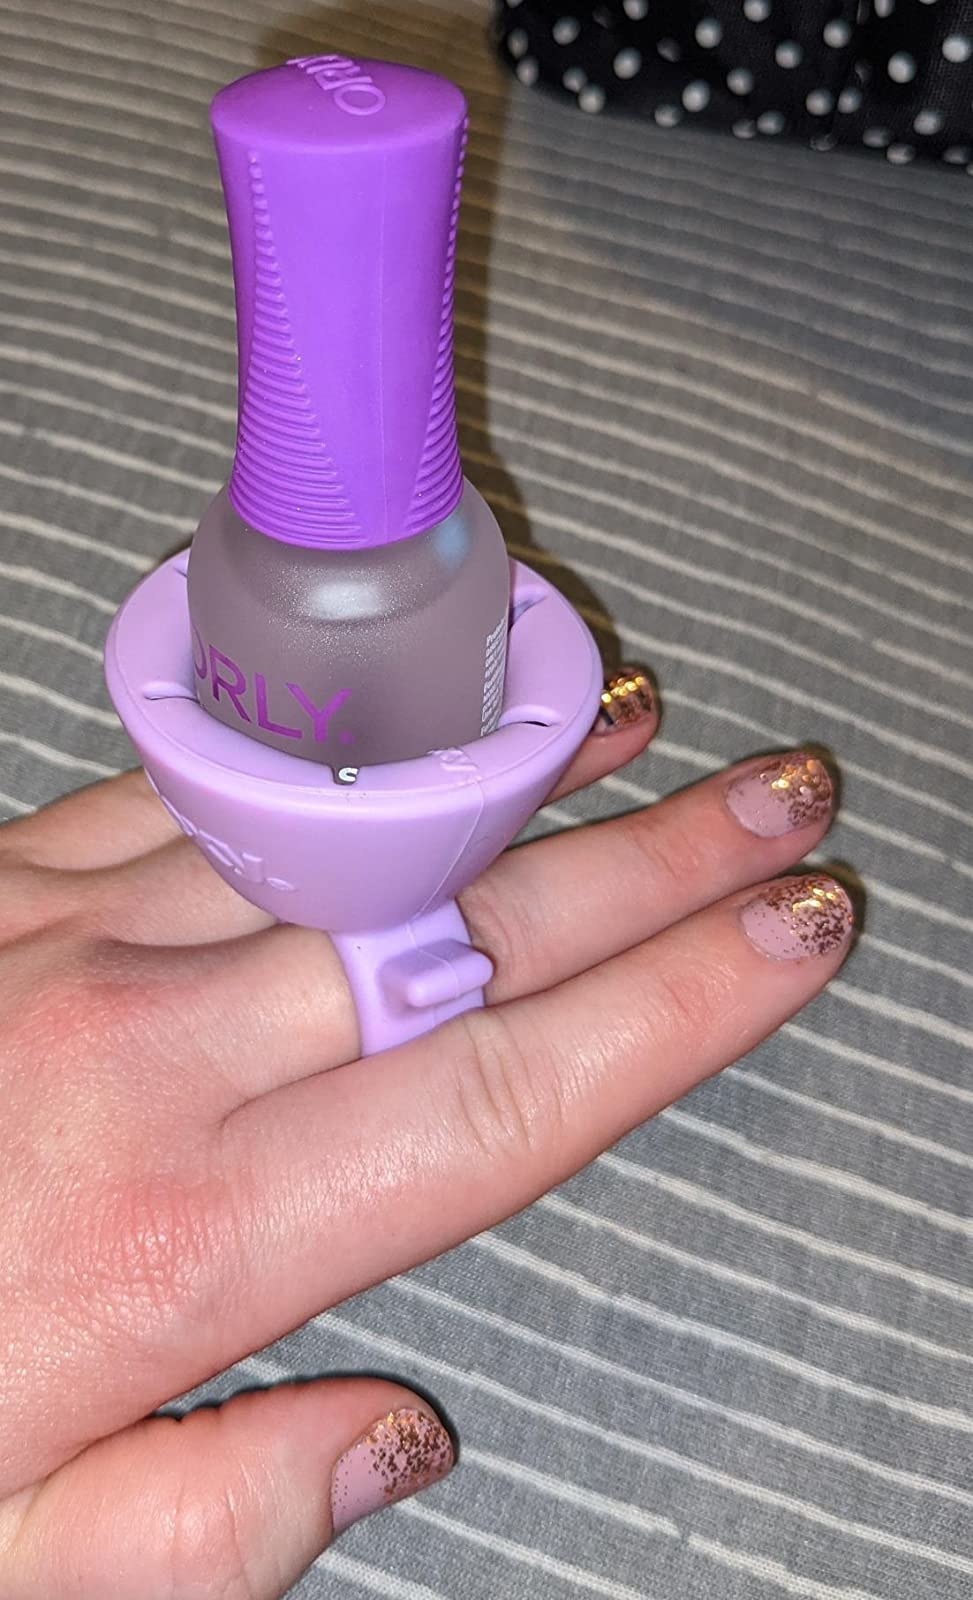 A reviewer showing their painted nails with the polish holder securely on their fingers 